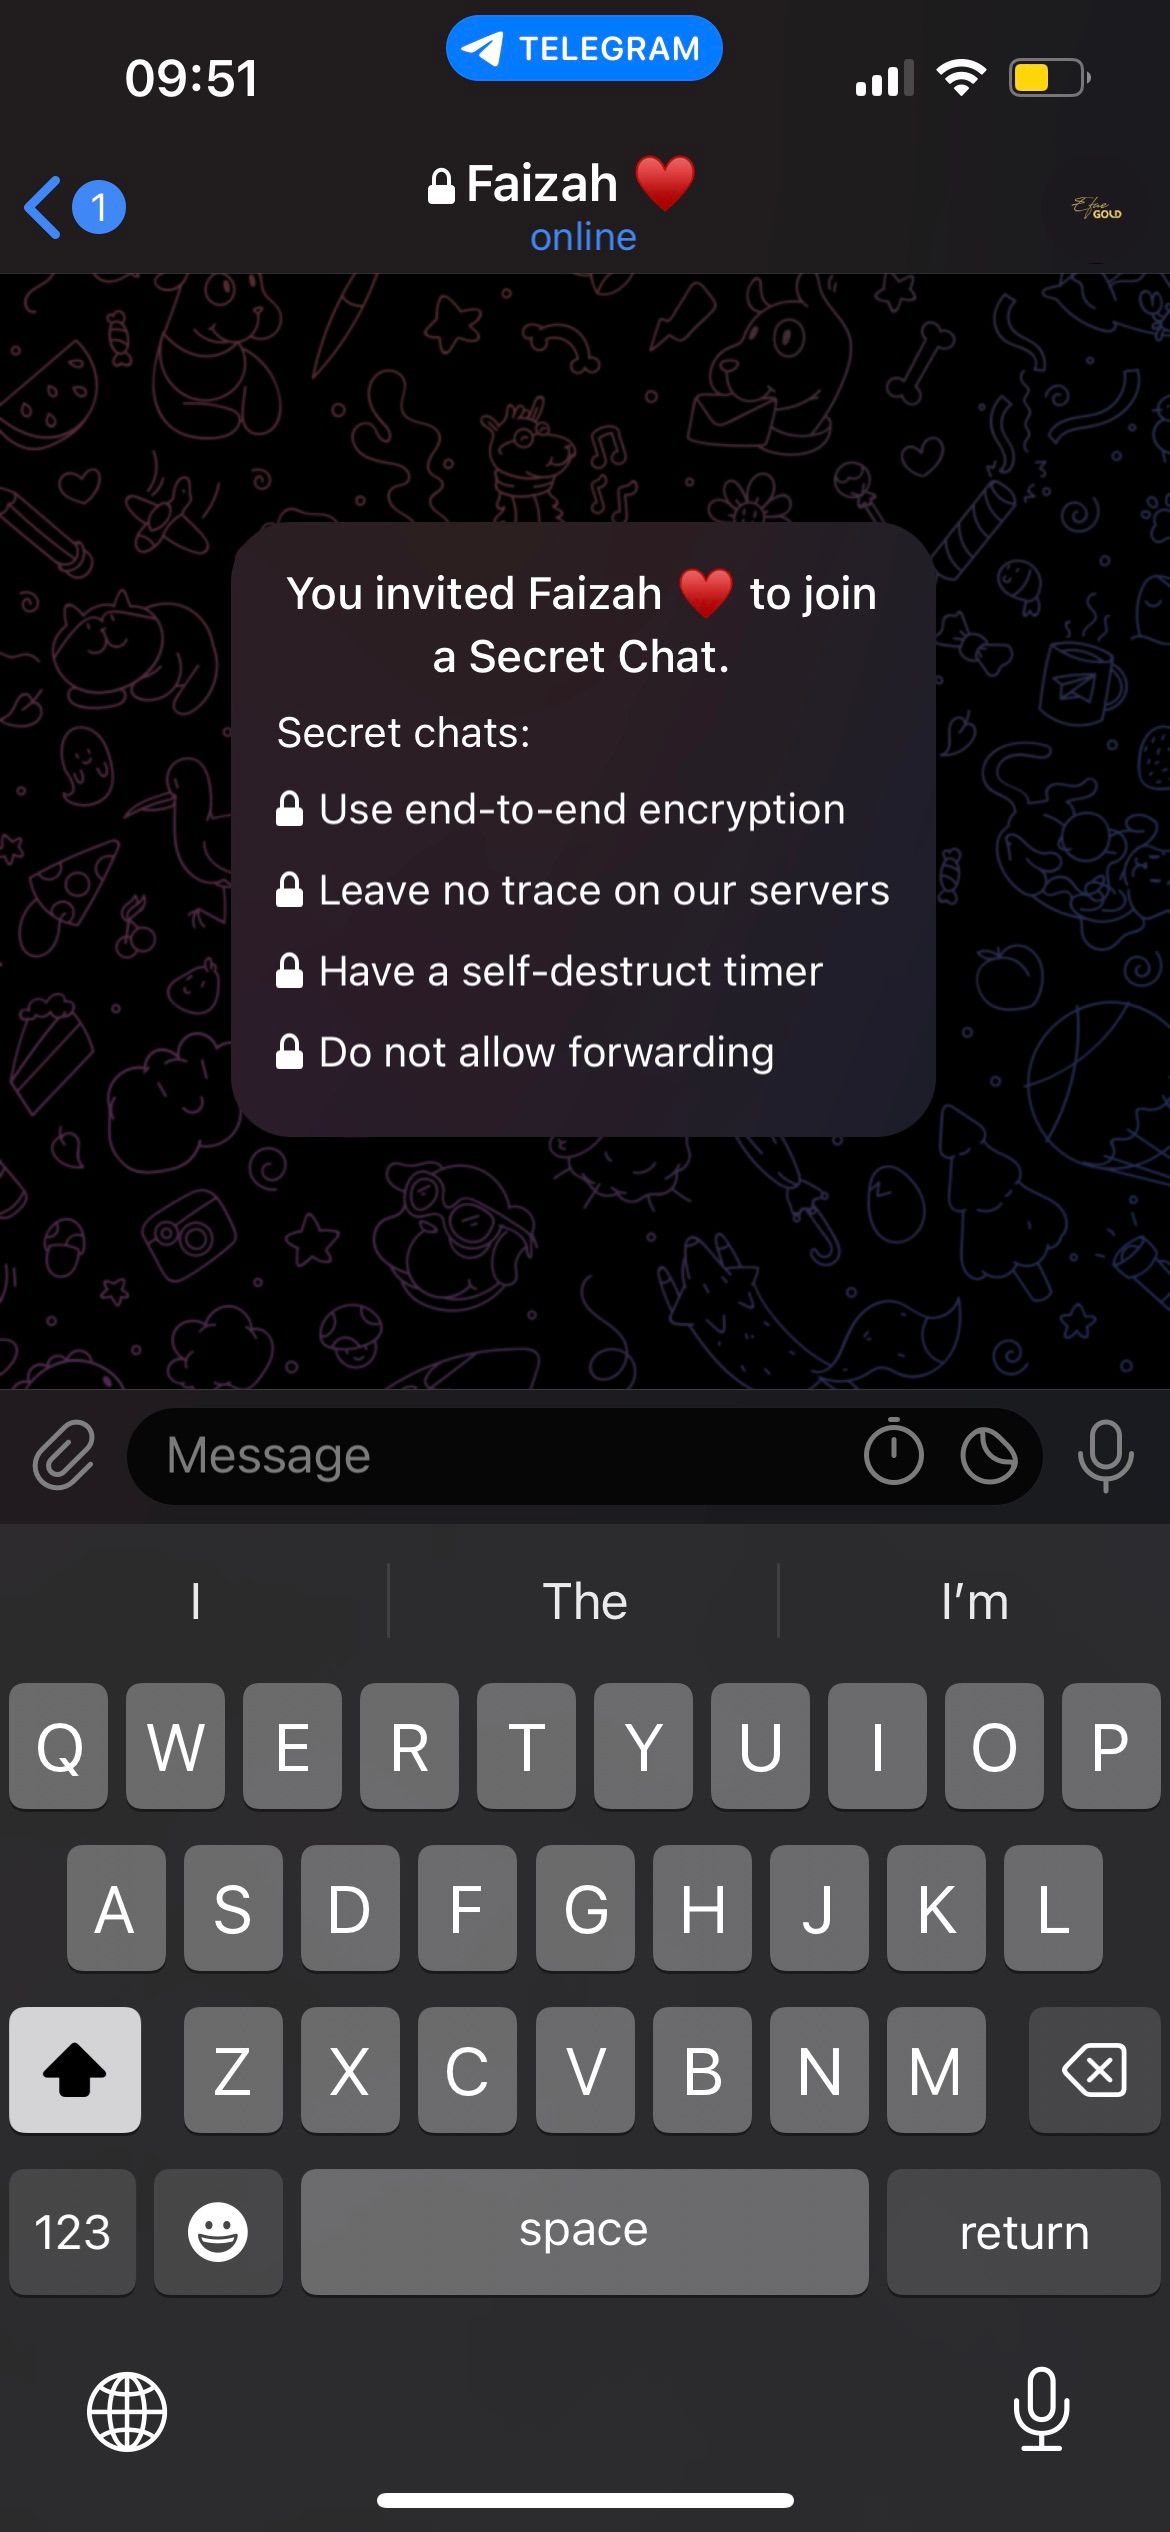 A Secret Chat chat opened on Telegram